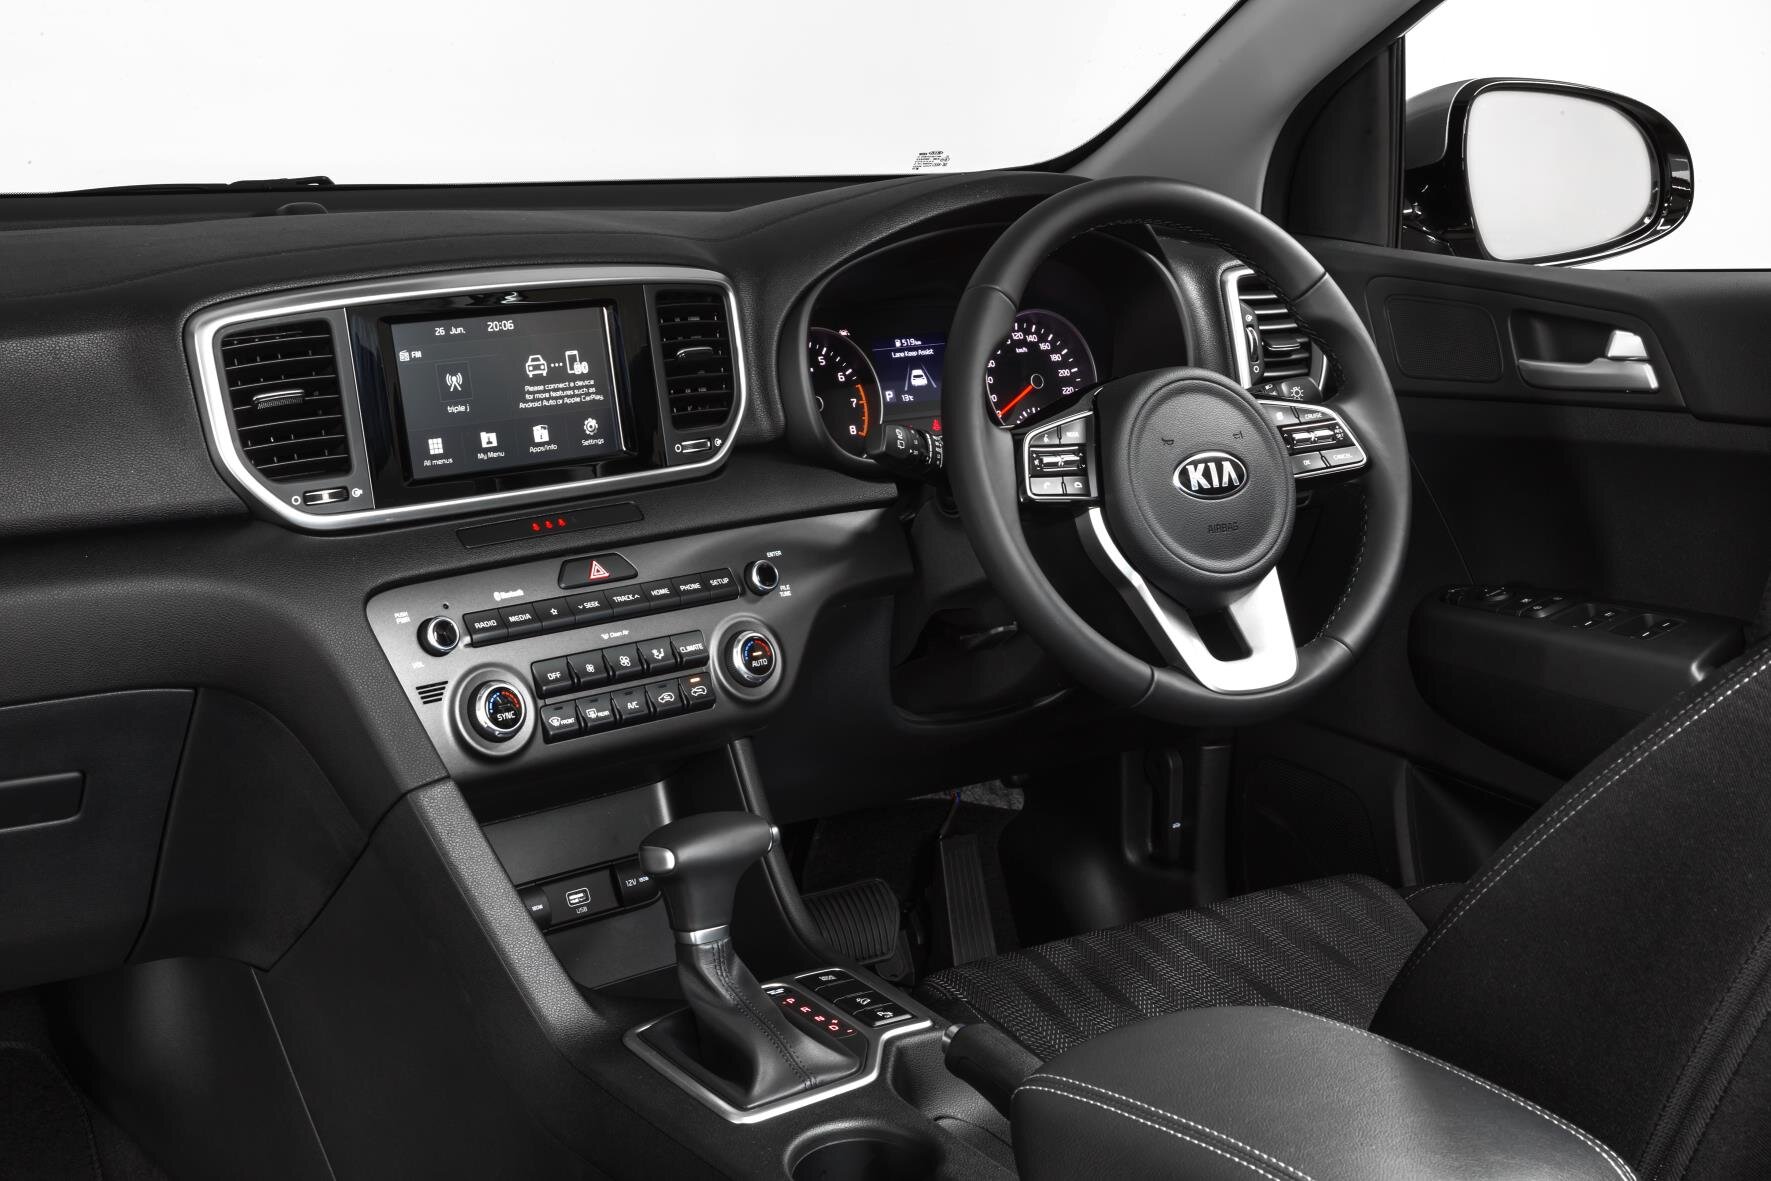 2020 Kia Sportage review & buyer's guide — Auto Expert by